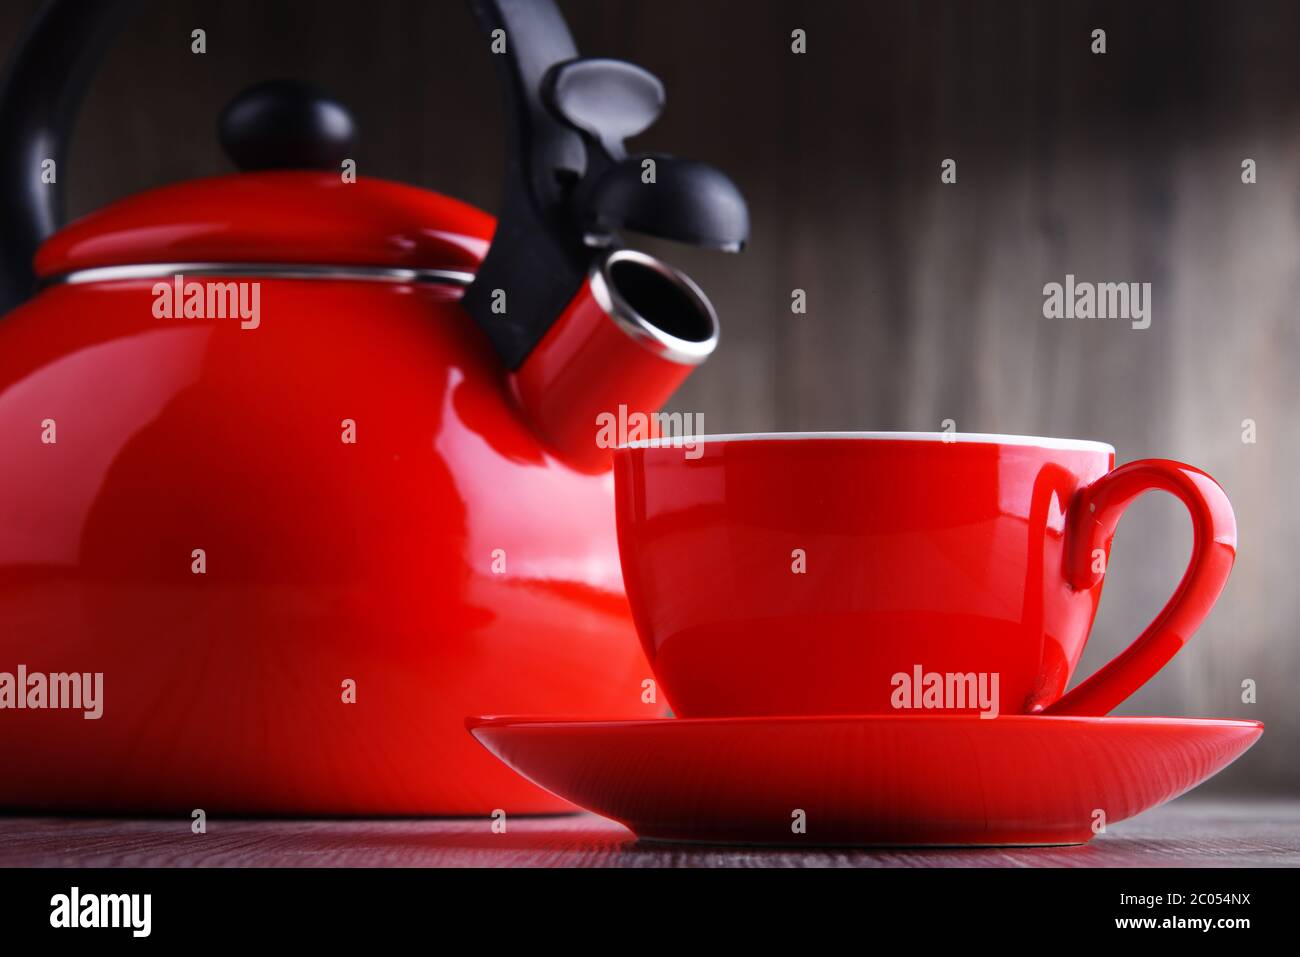 Cup of coffee and stainless steel stovetop kettle with whistle. Stock Photo